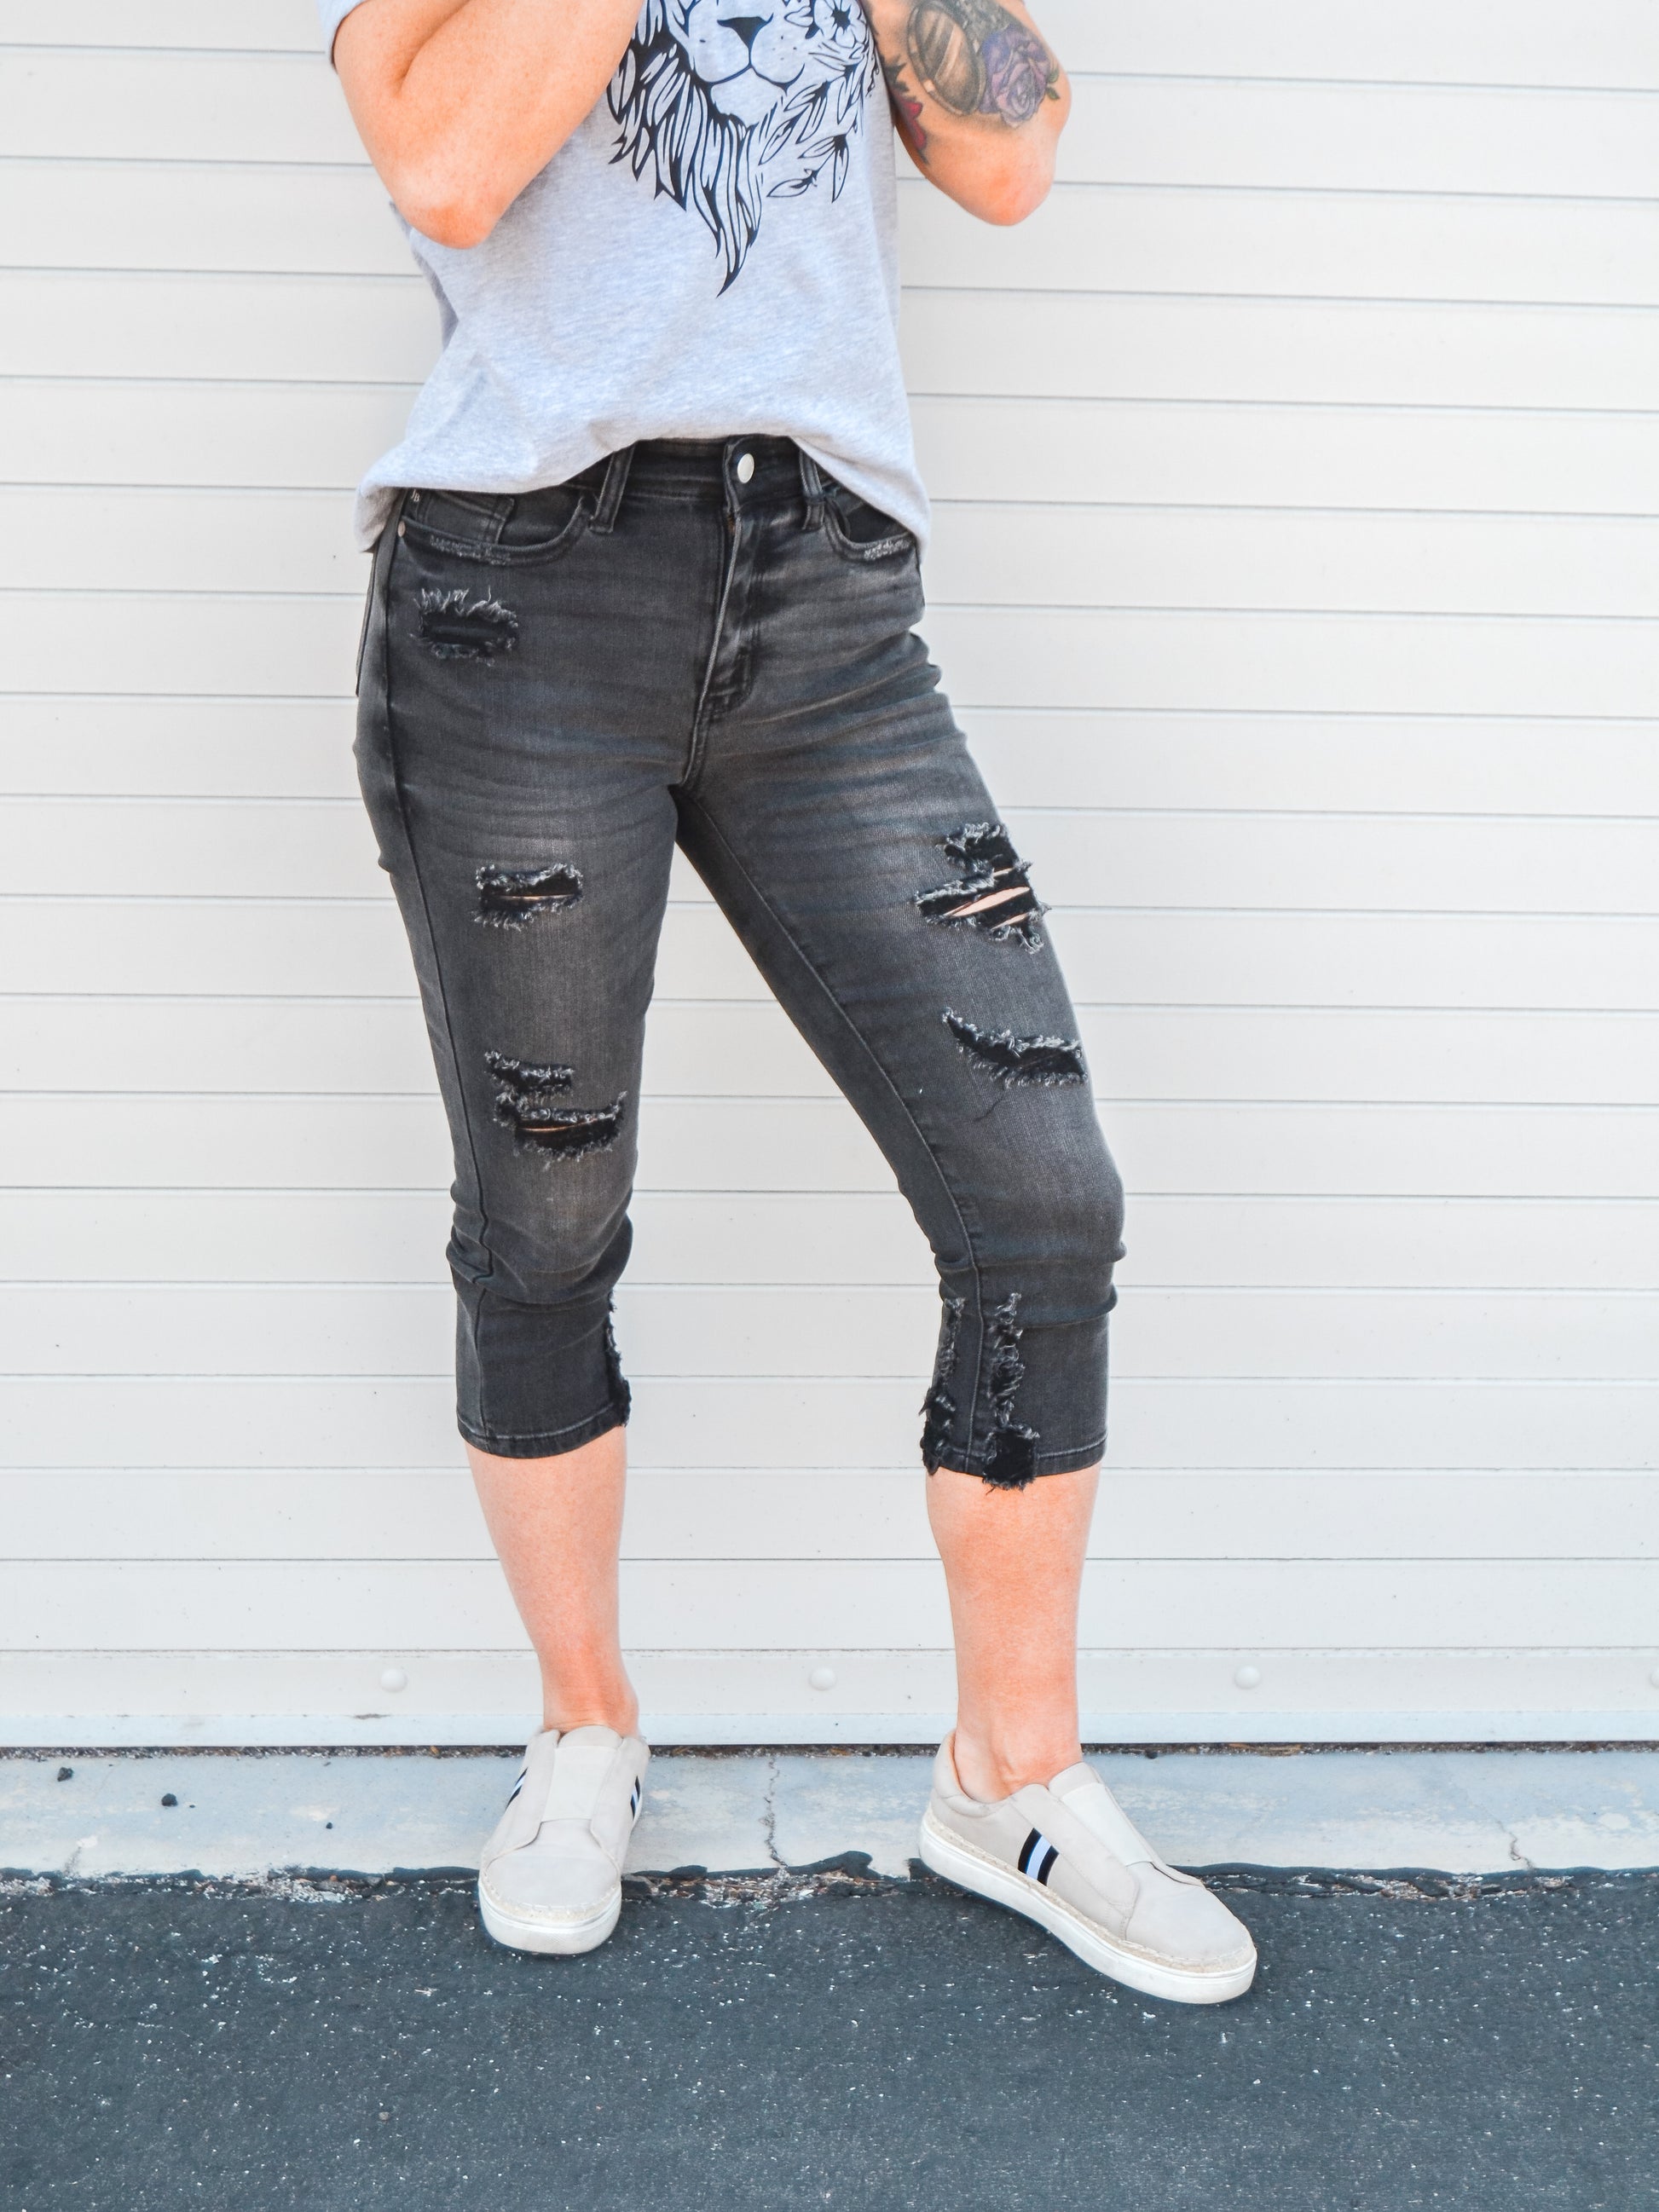 Black capris with distressing down the front.